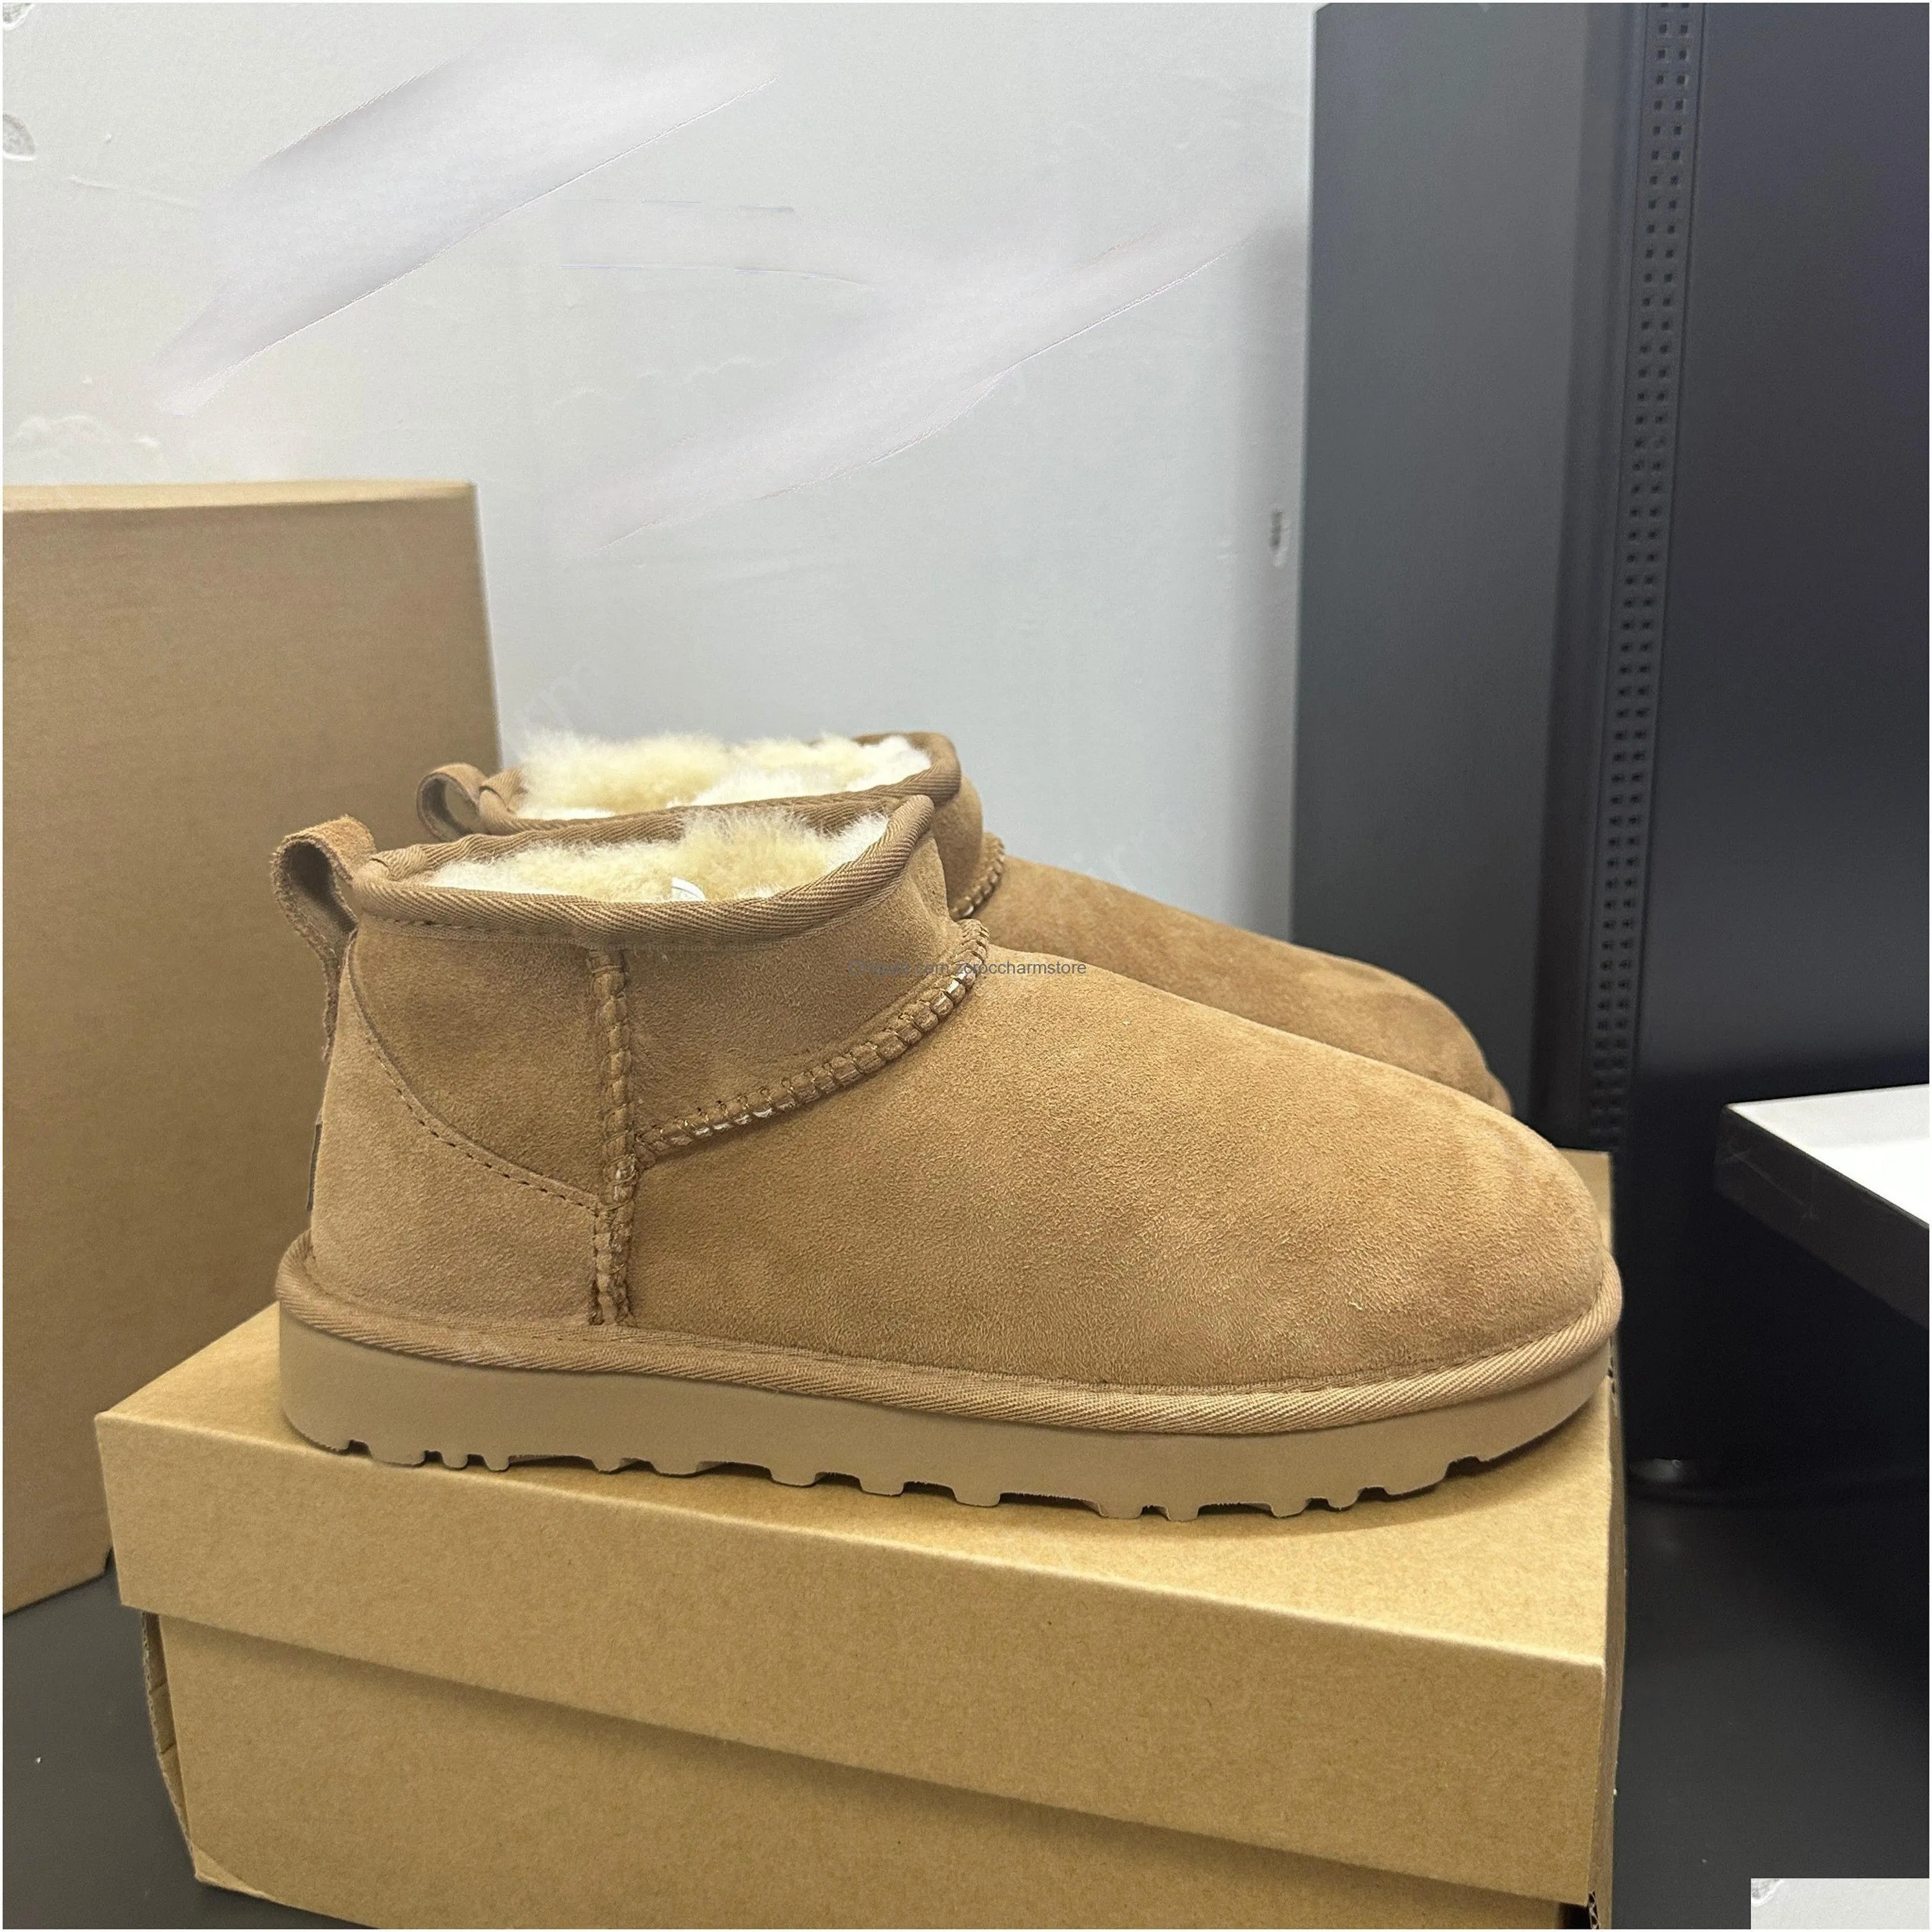 ultra mini platform boot designer woman winter ankle australia snow boots thick bottom real leather warm fluffy booties with fur size